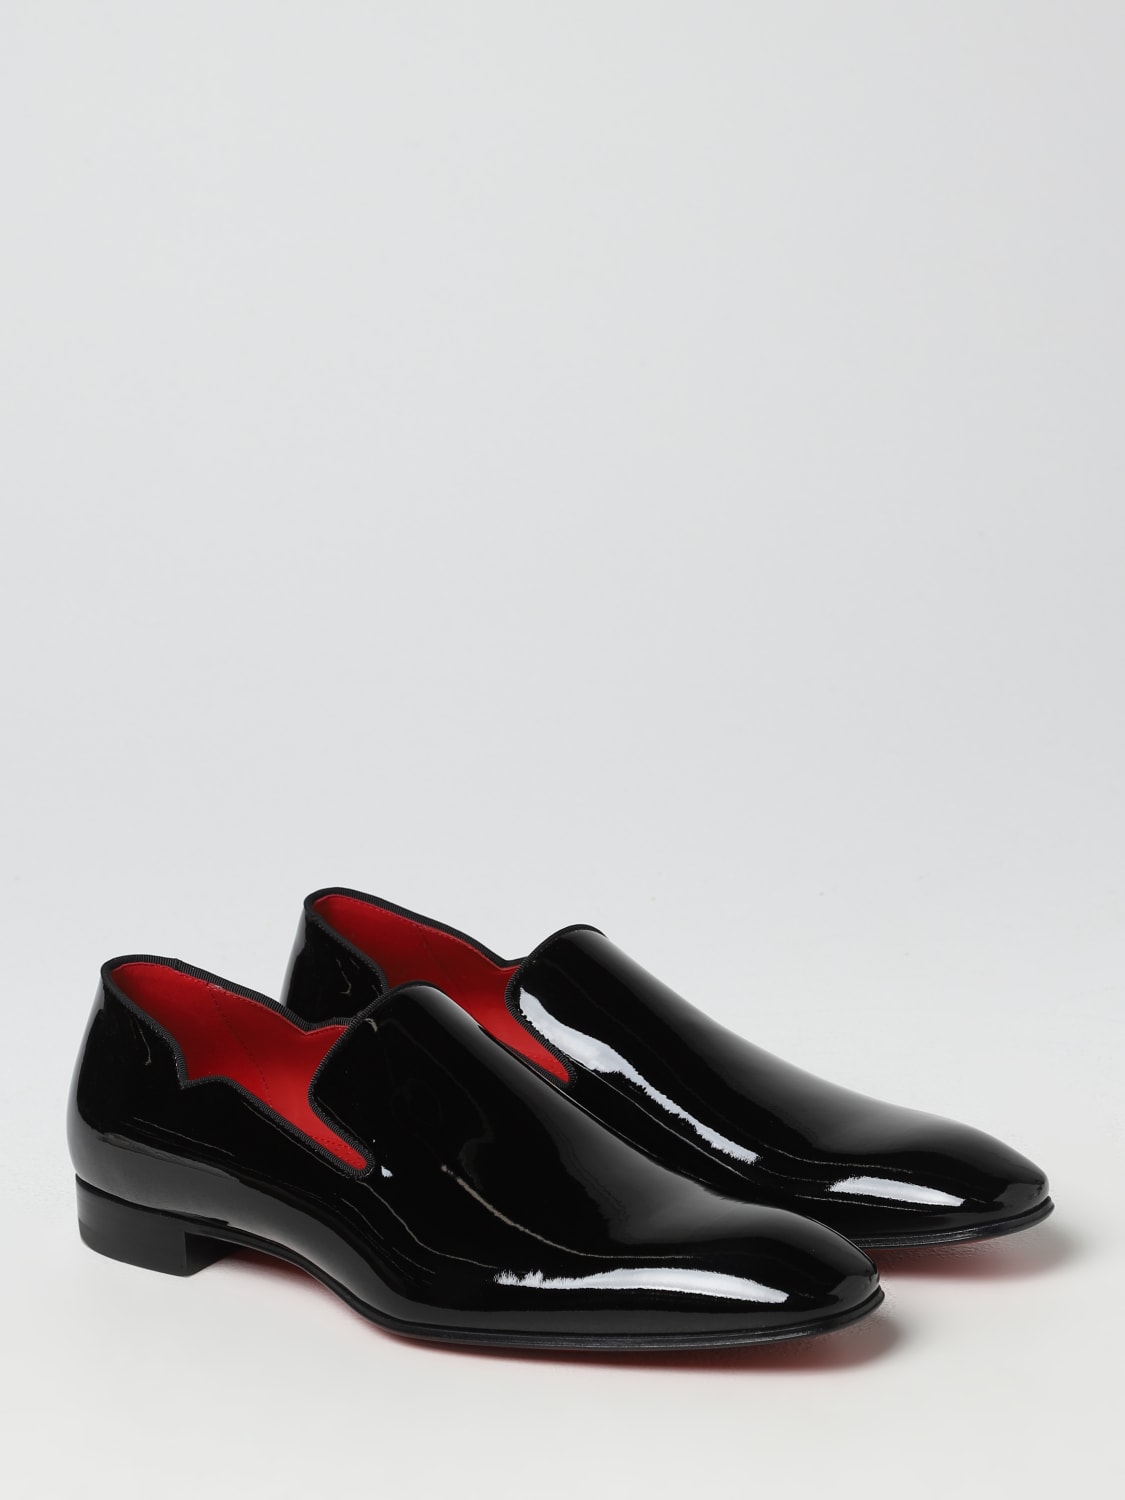 Christian Louboutin Leather Loafers & Slip-Ons for Men